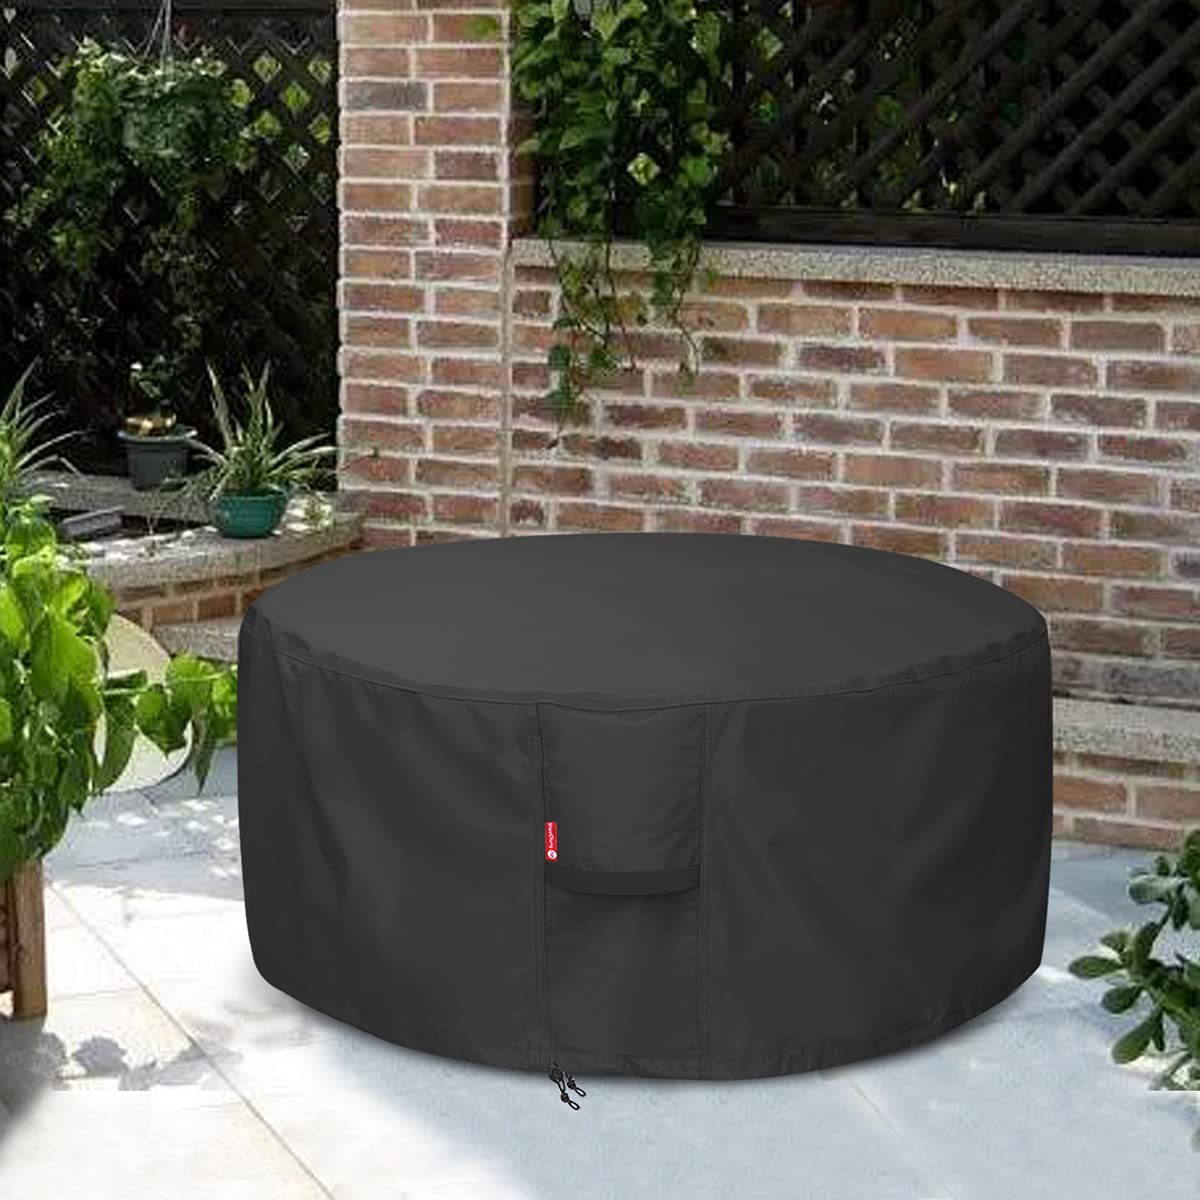 Fire Pit Cover - Waterproof 600D Heavy Duty Round Patio Fire Bowl Cover Black (Round - 50”D x 24”H)-Fits 45",46",48 inch,50 inch FirePit/Bowl Cover